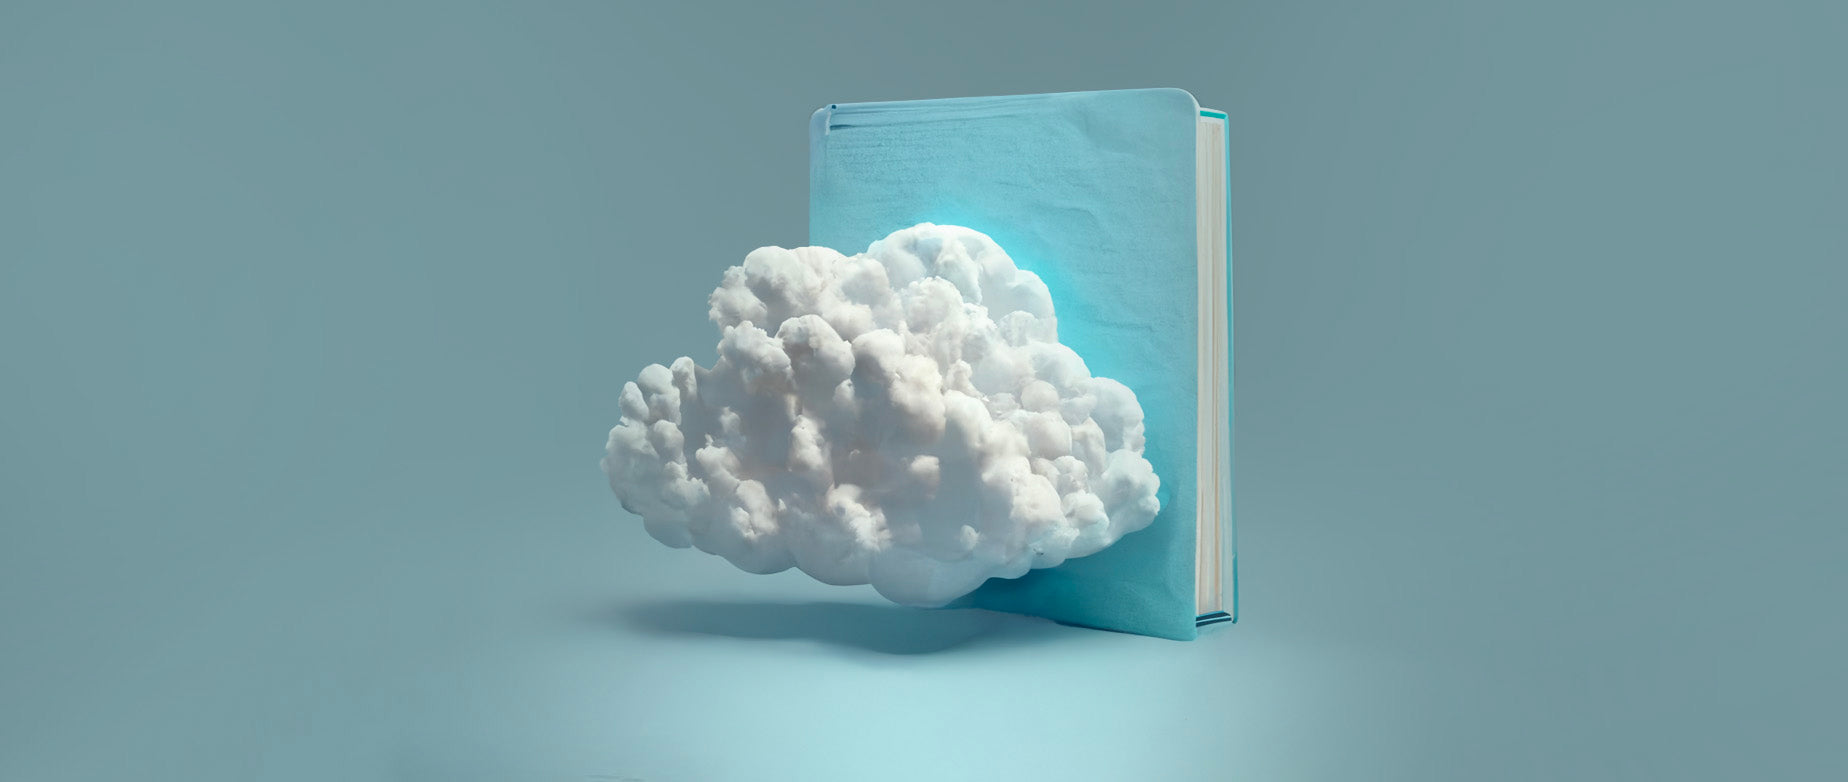 a single cloud floats in front of a light blue notebook: how to share your experience in memo format